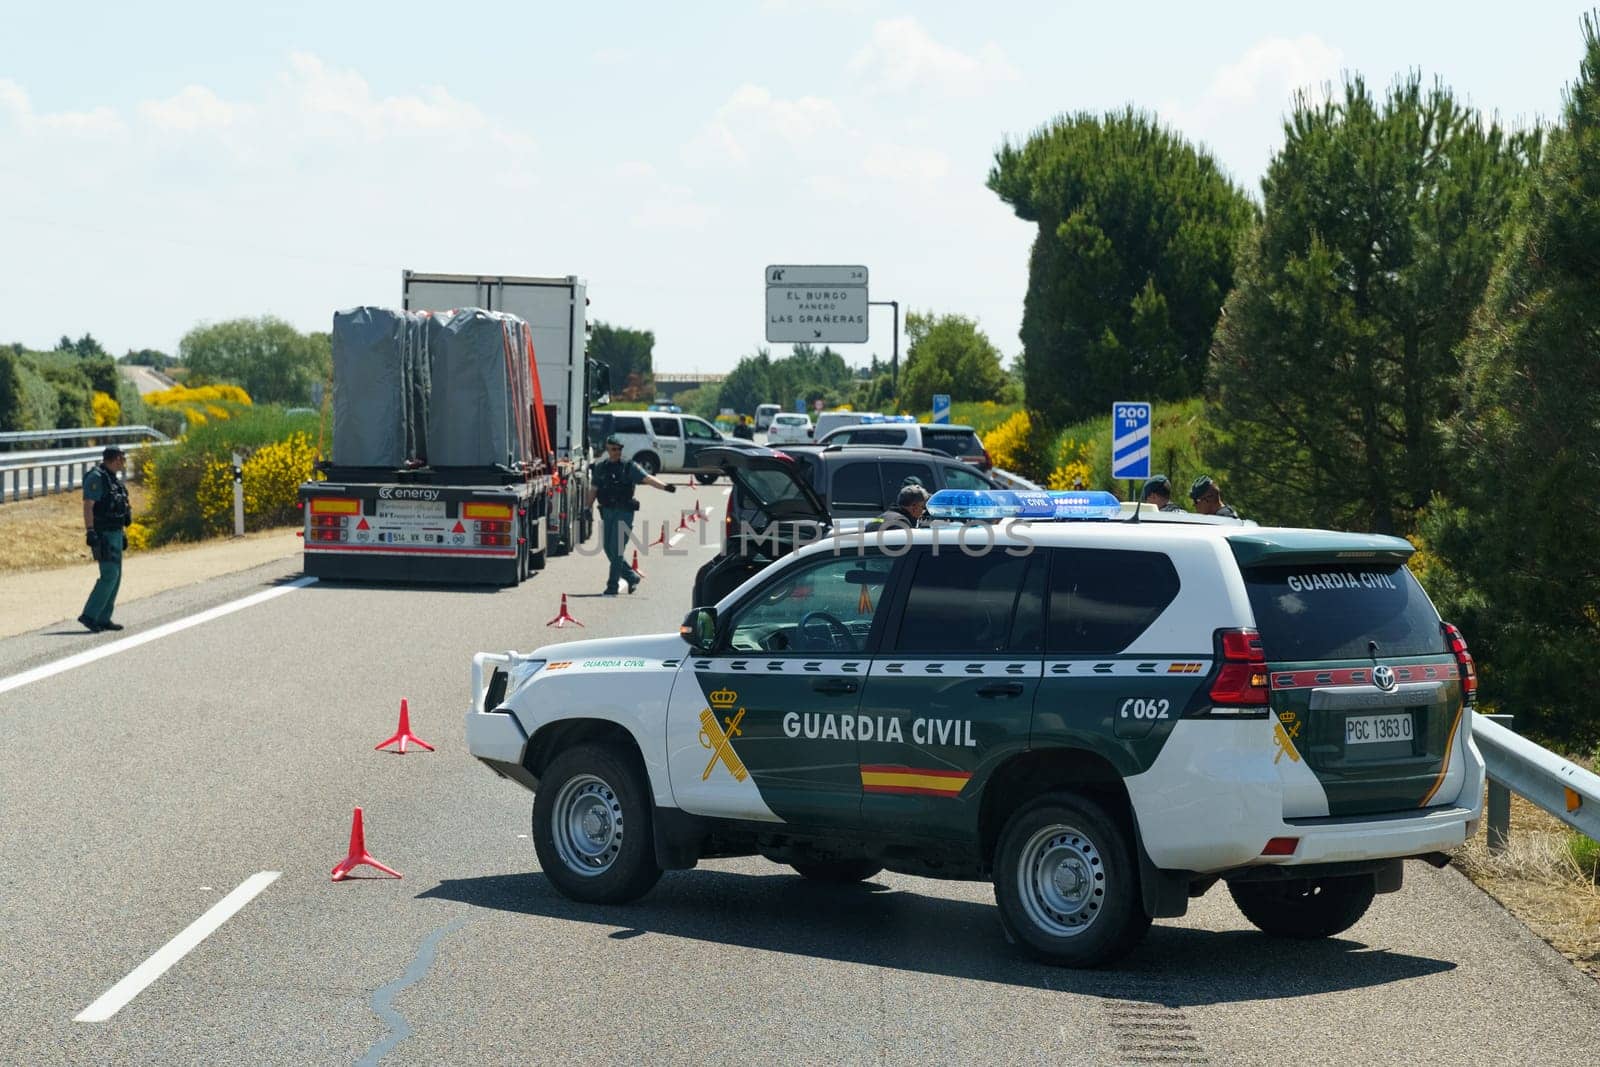 Sahagun, Spain - June 5, 2023: Civilian police are restricting traffic and blocking traffic with police vehicles.